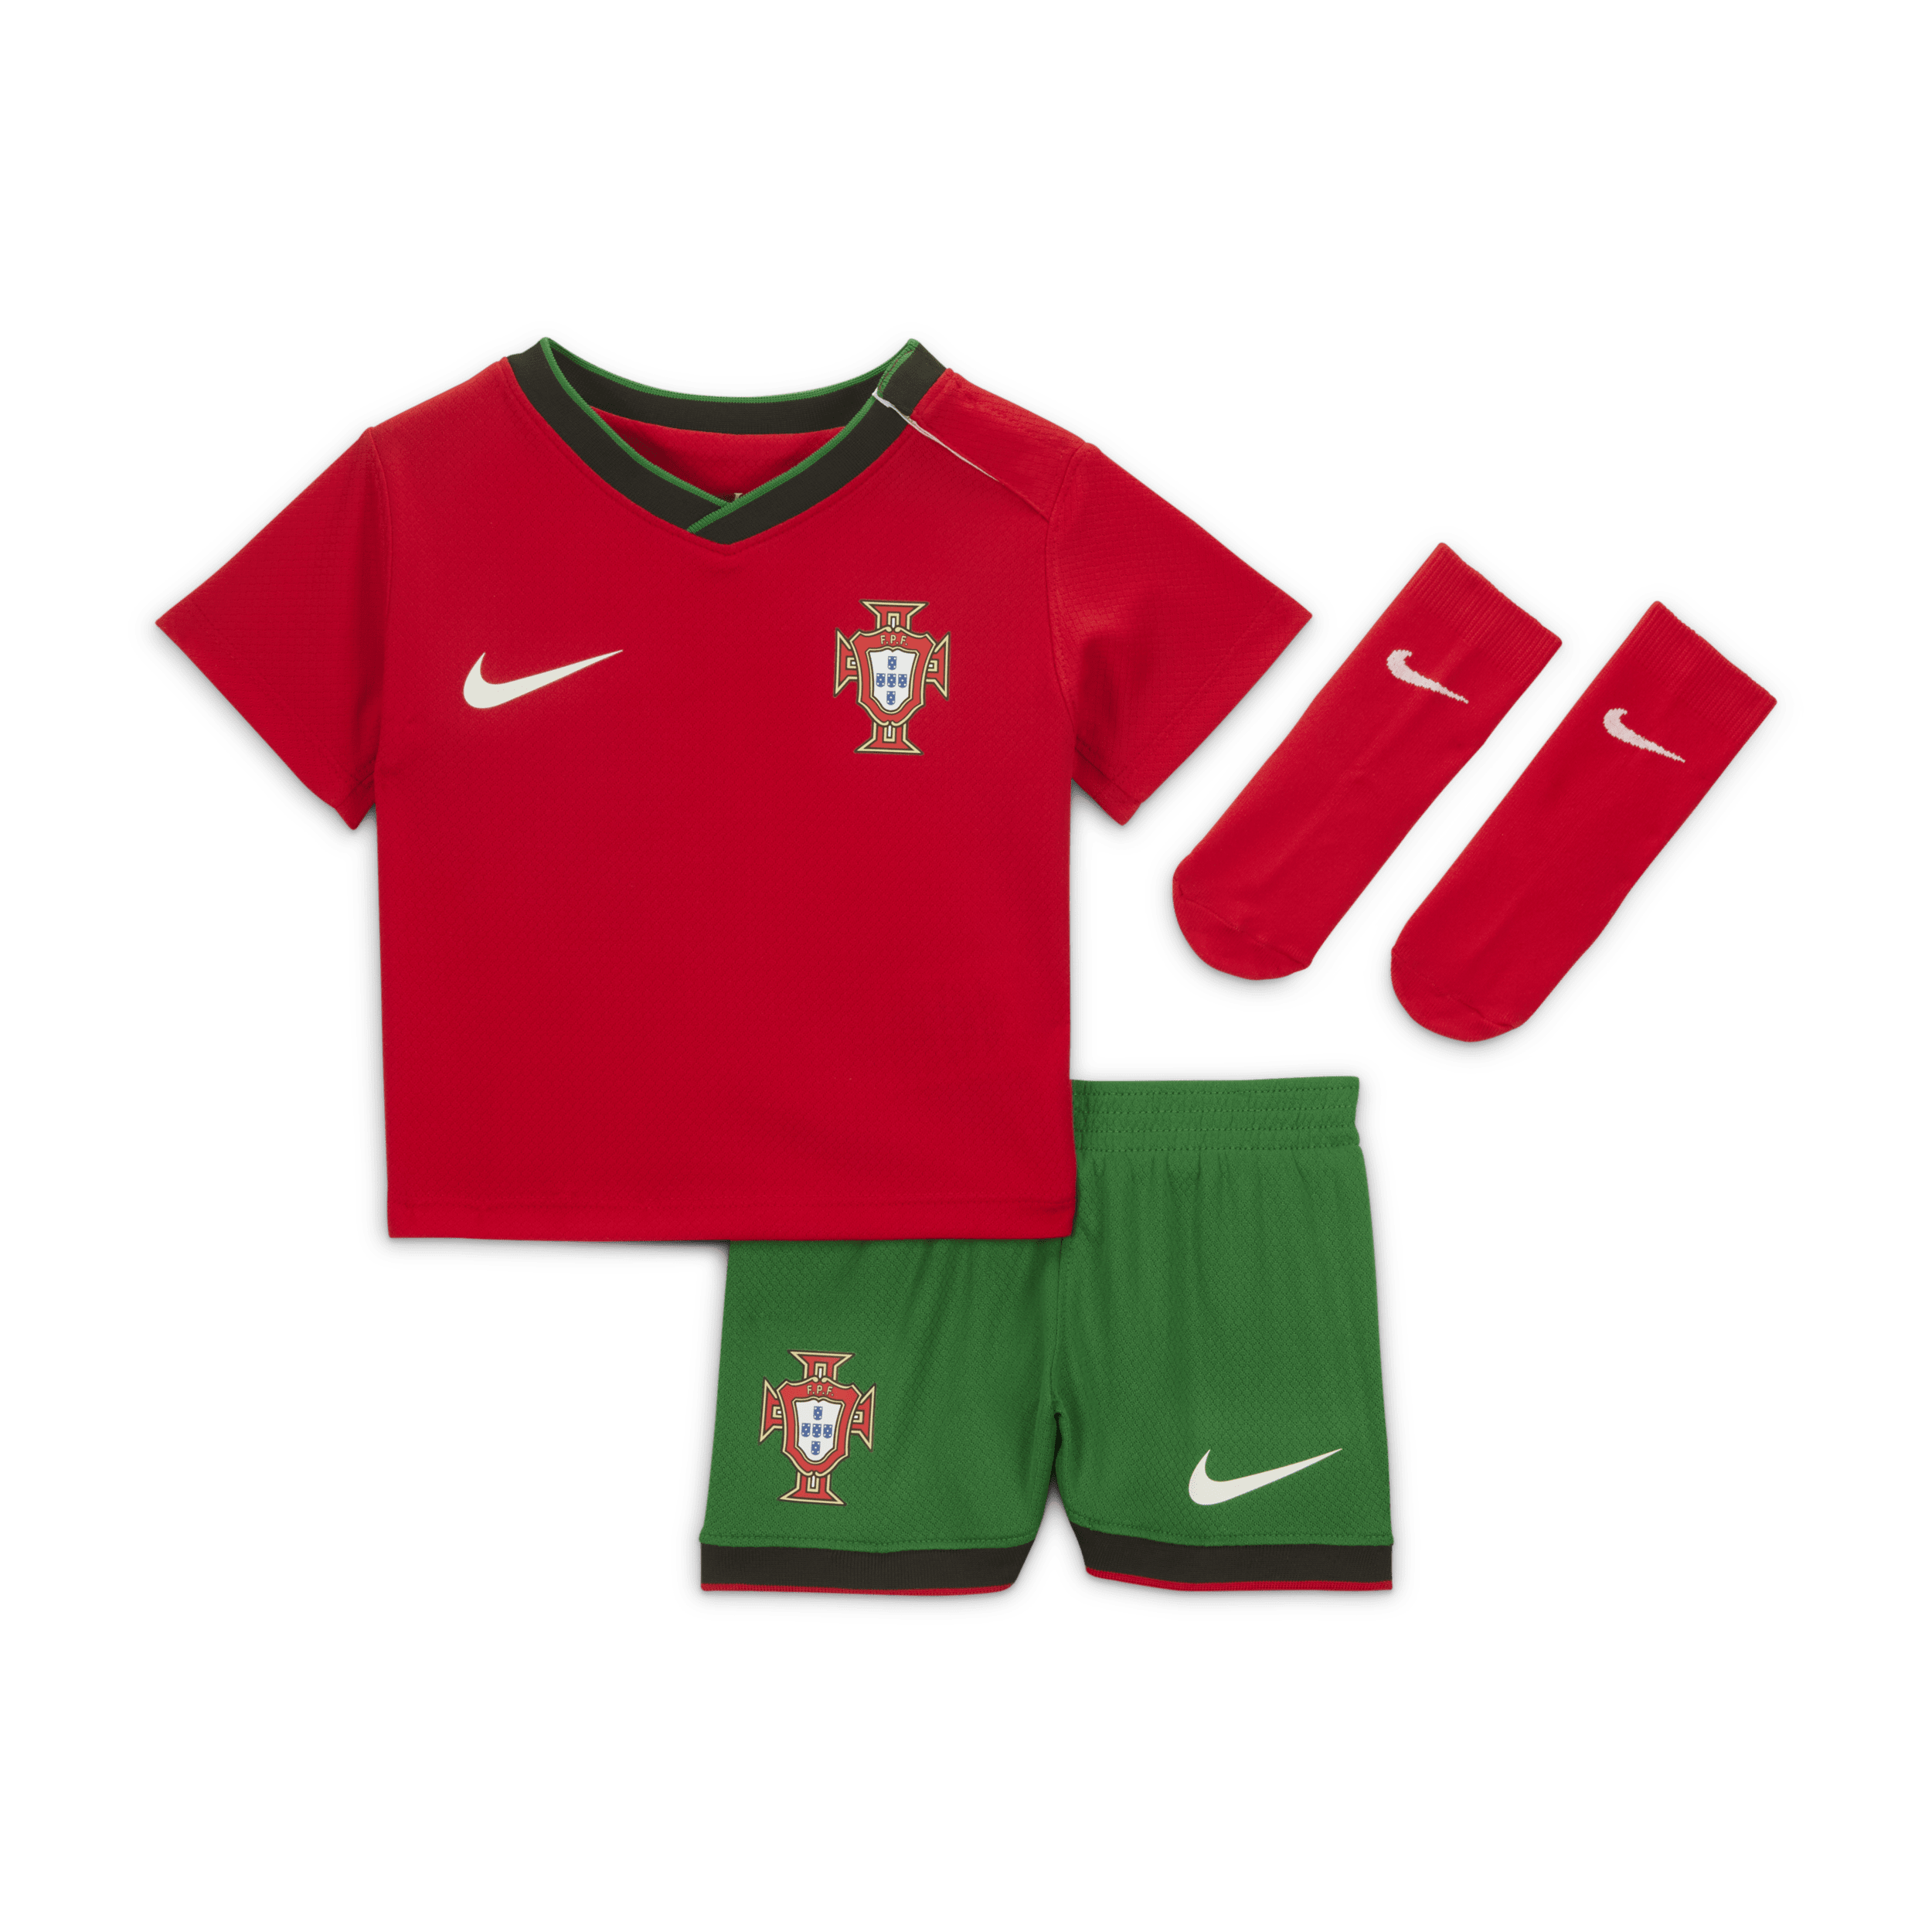 Portugal 2024 Stadium Thuis Nike driedelig replica voetbaltenue voor baby's/peuters - Rood